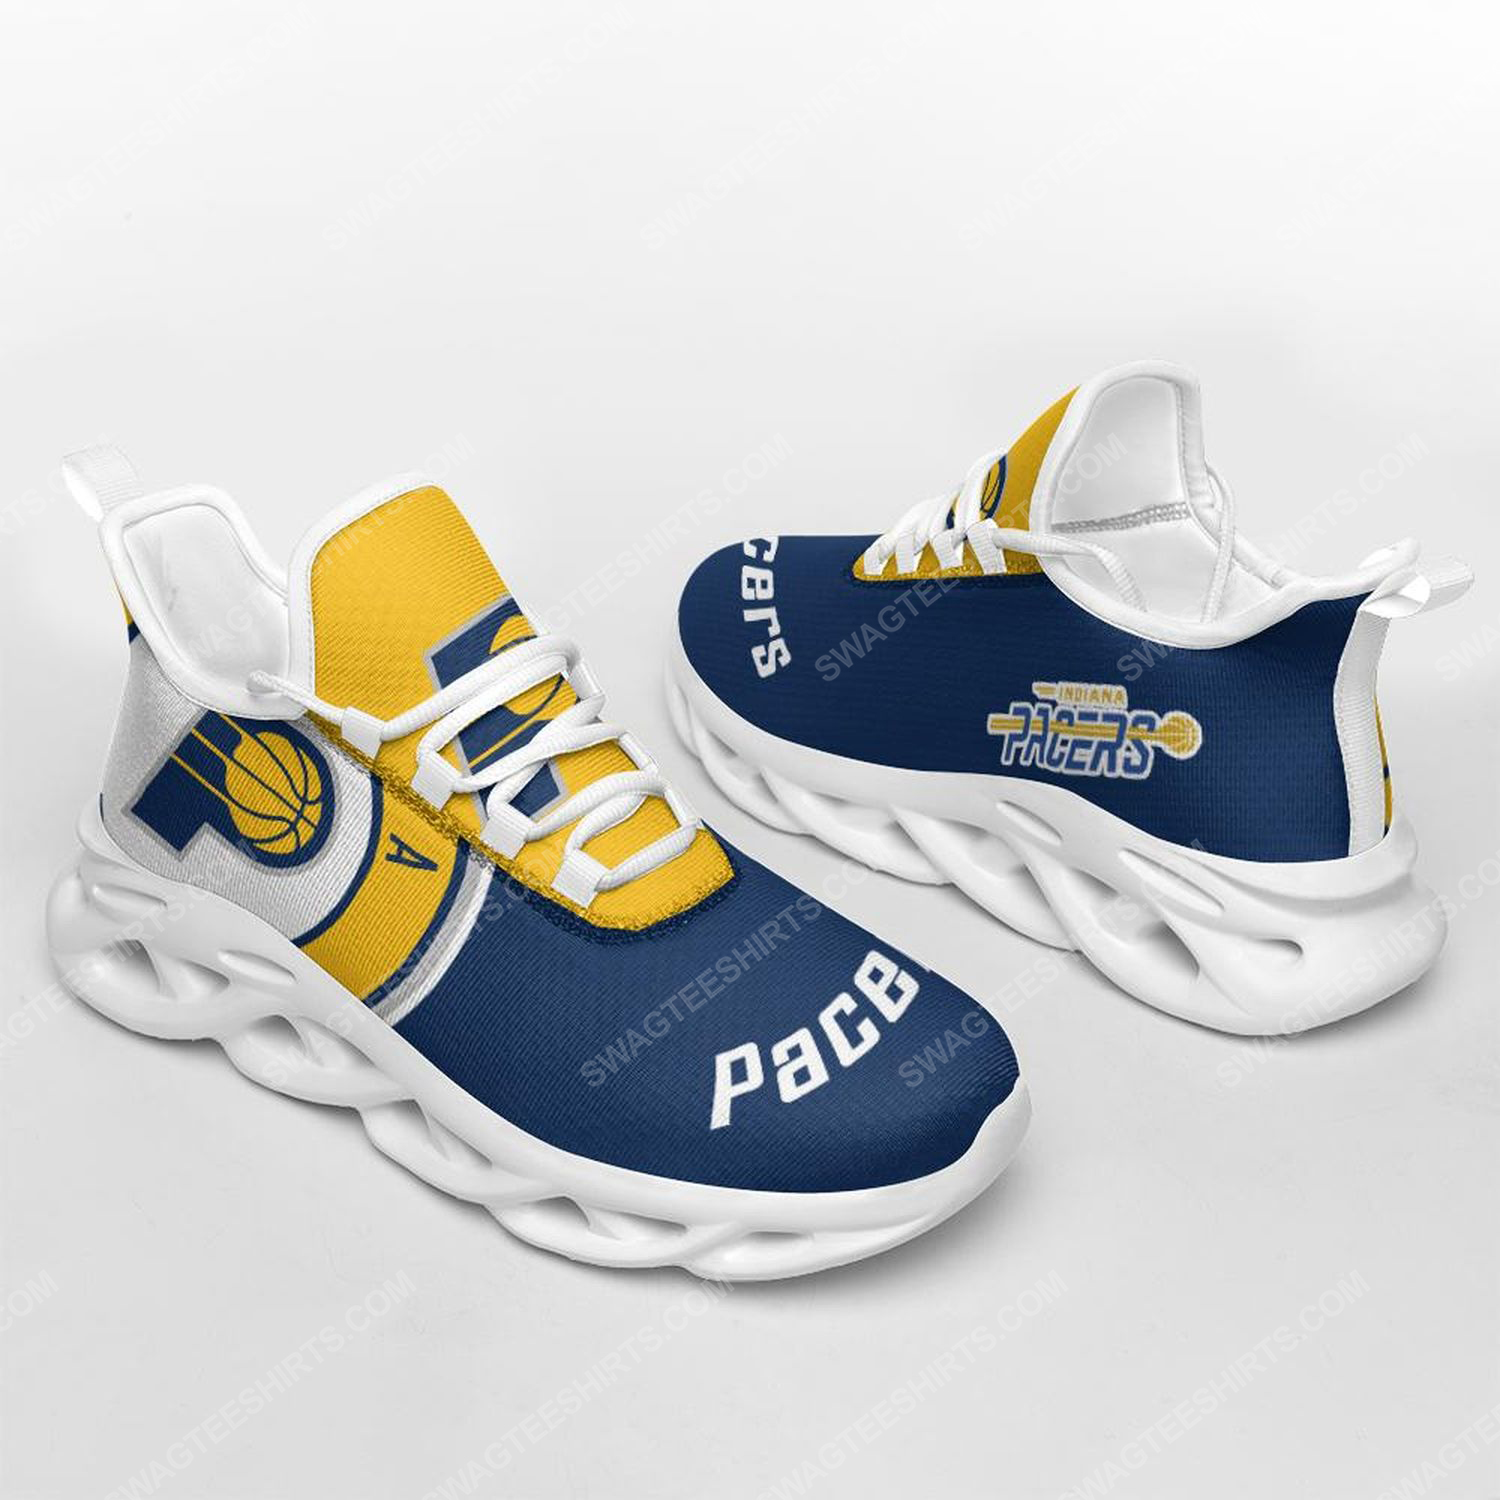 The indiana pacers basketball team max soul shoes 1